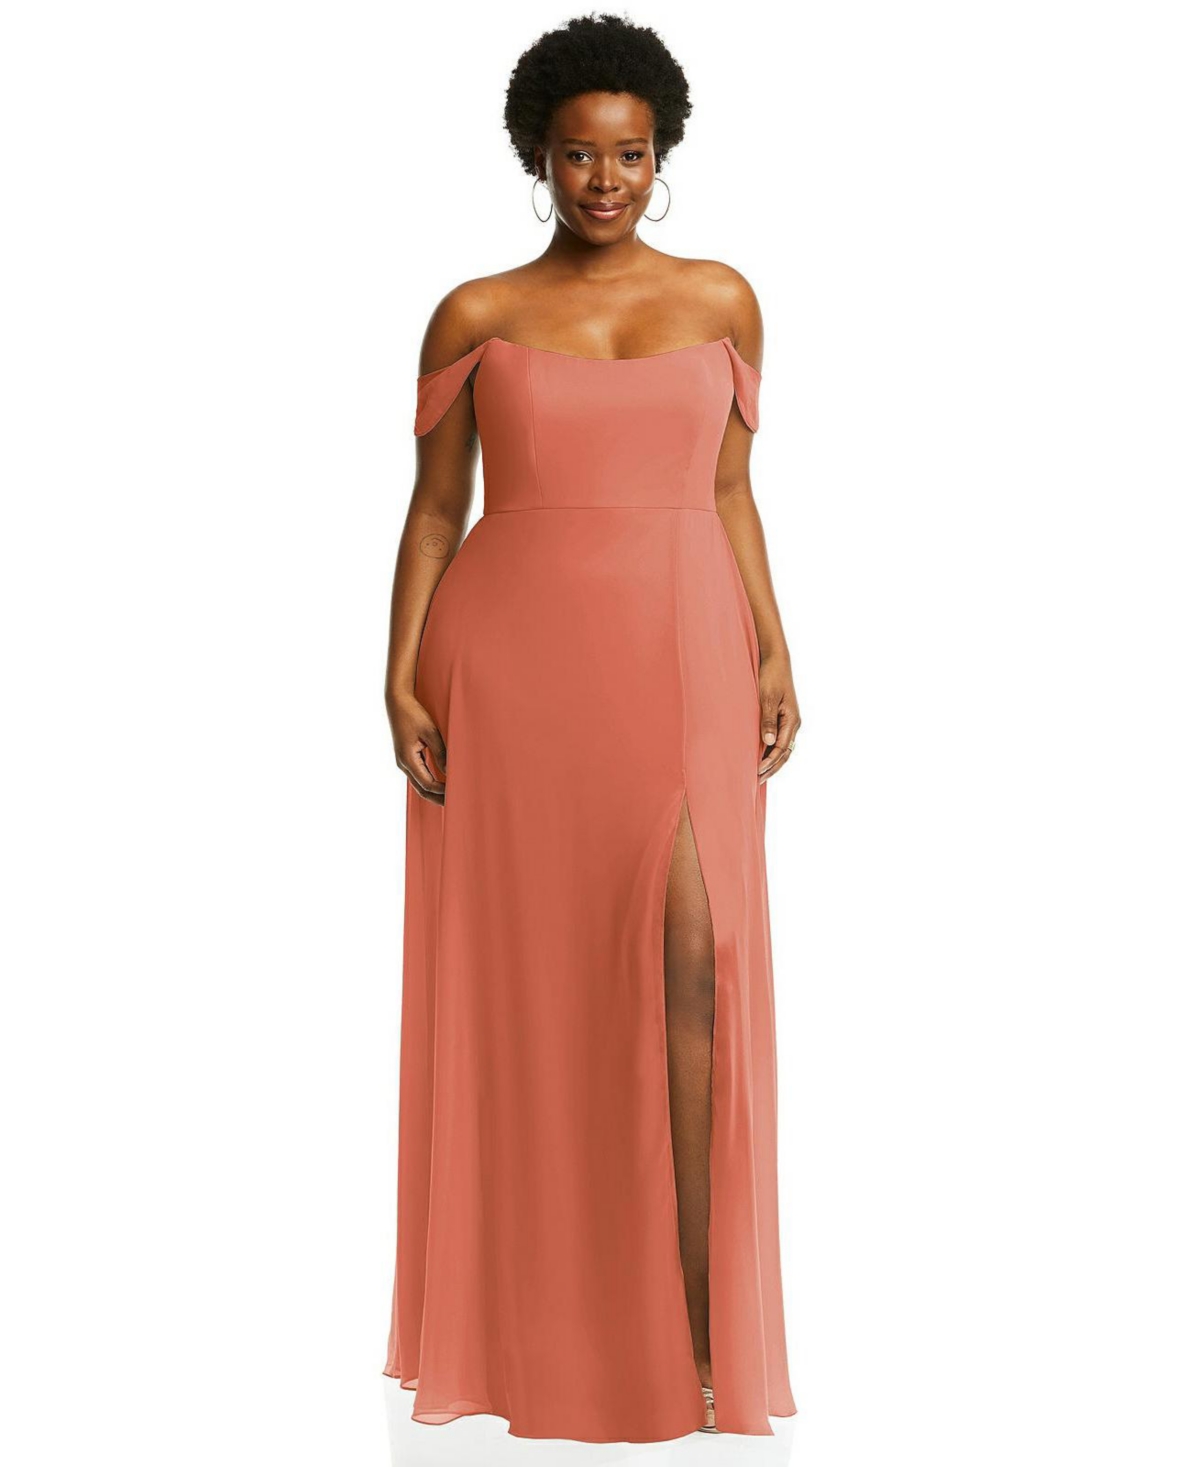 Plus Size Off-the-Shoulder Basque Neck Maxi Dress with Flounce Sleeves - Tea rose